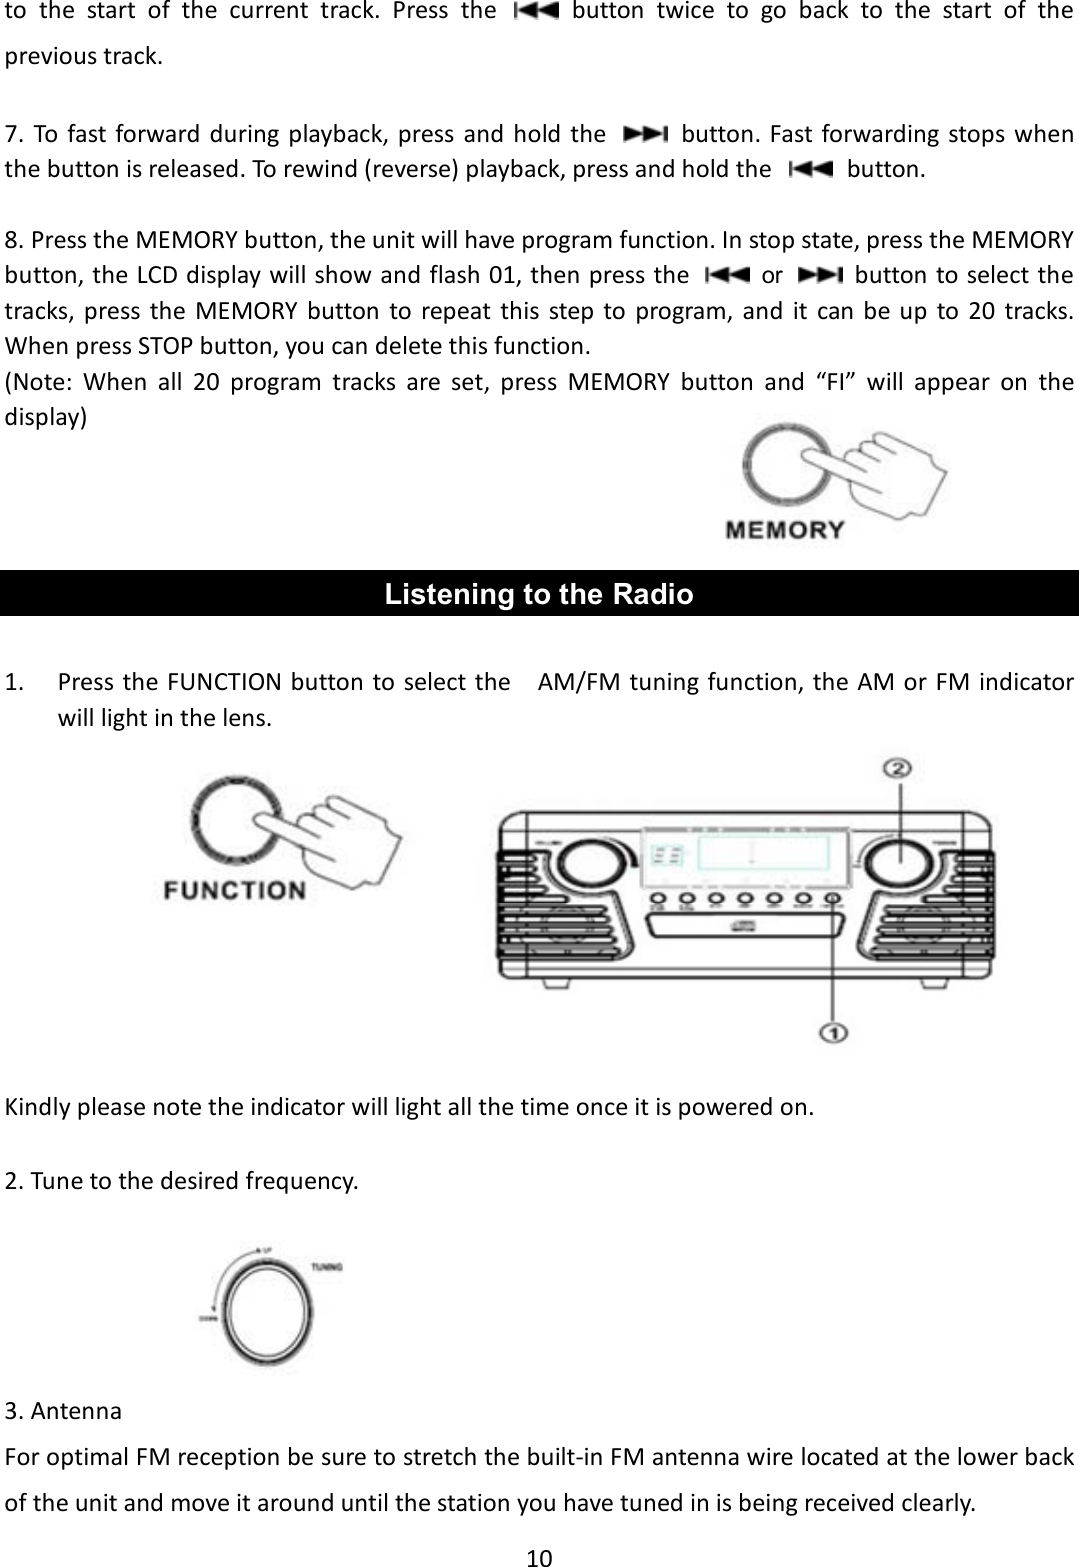 10    to  the  start  of  the  current  track.  Press  the    button  twice  to  go  back  to  the  start  of  the previous track.  7. To  fast forward during playback, press  and hold  the    button. Fast forwarding stops when the button is released. To rewind (reverse) playback, press and hold the    button.  8. Press the MEMORY button, the unit will have program function. In stop state, press the MEMORY button, the LCD display will show and flash 01, then press the   or   button to select the tracks, press the MEMORY button  to  repeat  this  step to  program, and  it  can be up to  20  tracks. When press STOP button, you can delete this function.             (Note:  When  all  20  program  tracks  are  set,  press  MEMORY  button  and  “FI”  will  appear  on  the display)    Listening to the Radio  1. Press the FUNCTION button to select the    AM/FM tuning function, the AM or FM indicator will light in the lens.                                                                               Kindly please note the indicator will light all the time once it is powered on.  2. Tune to the desired frequency.                                                                                             3. Antenna For optimal FM reception be sure to stretch the built-in FM antenna wire located at the lower back of the unit and move it around until the station you have tuned in is being received clearly. 